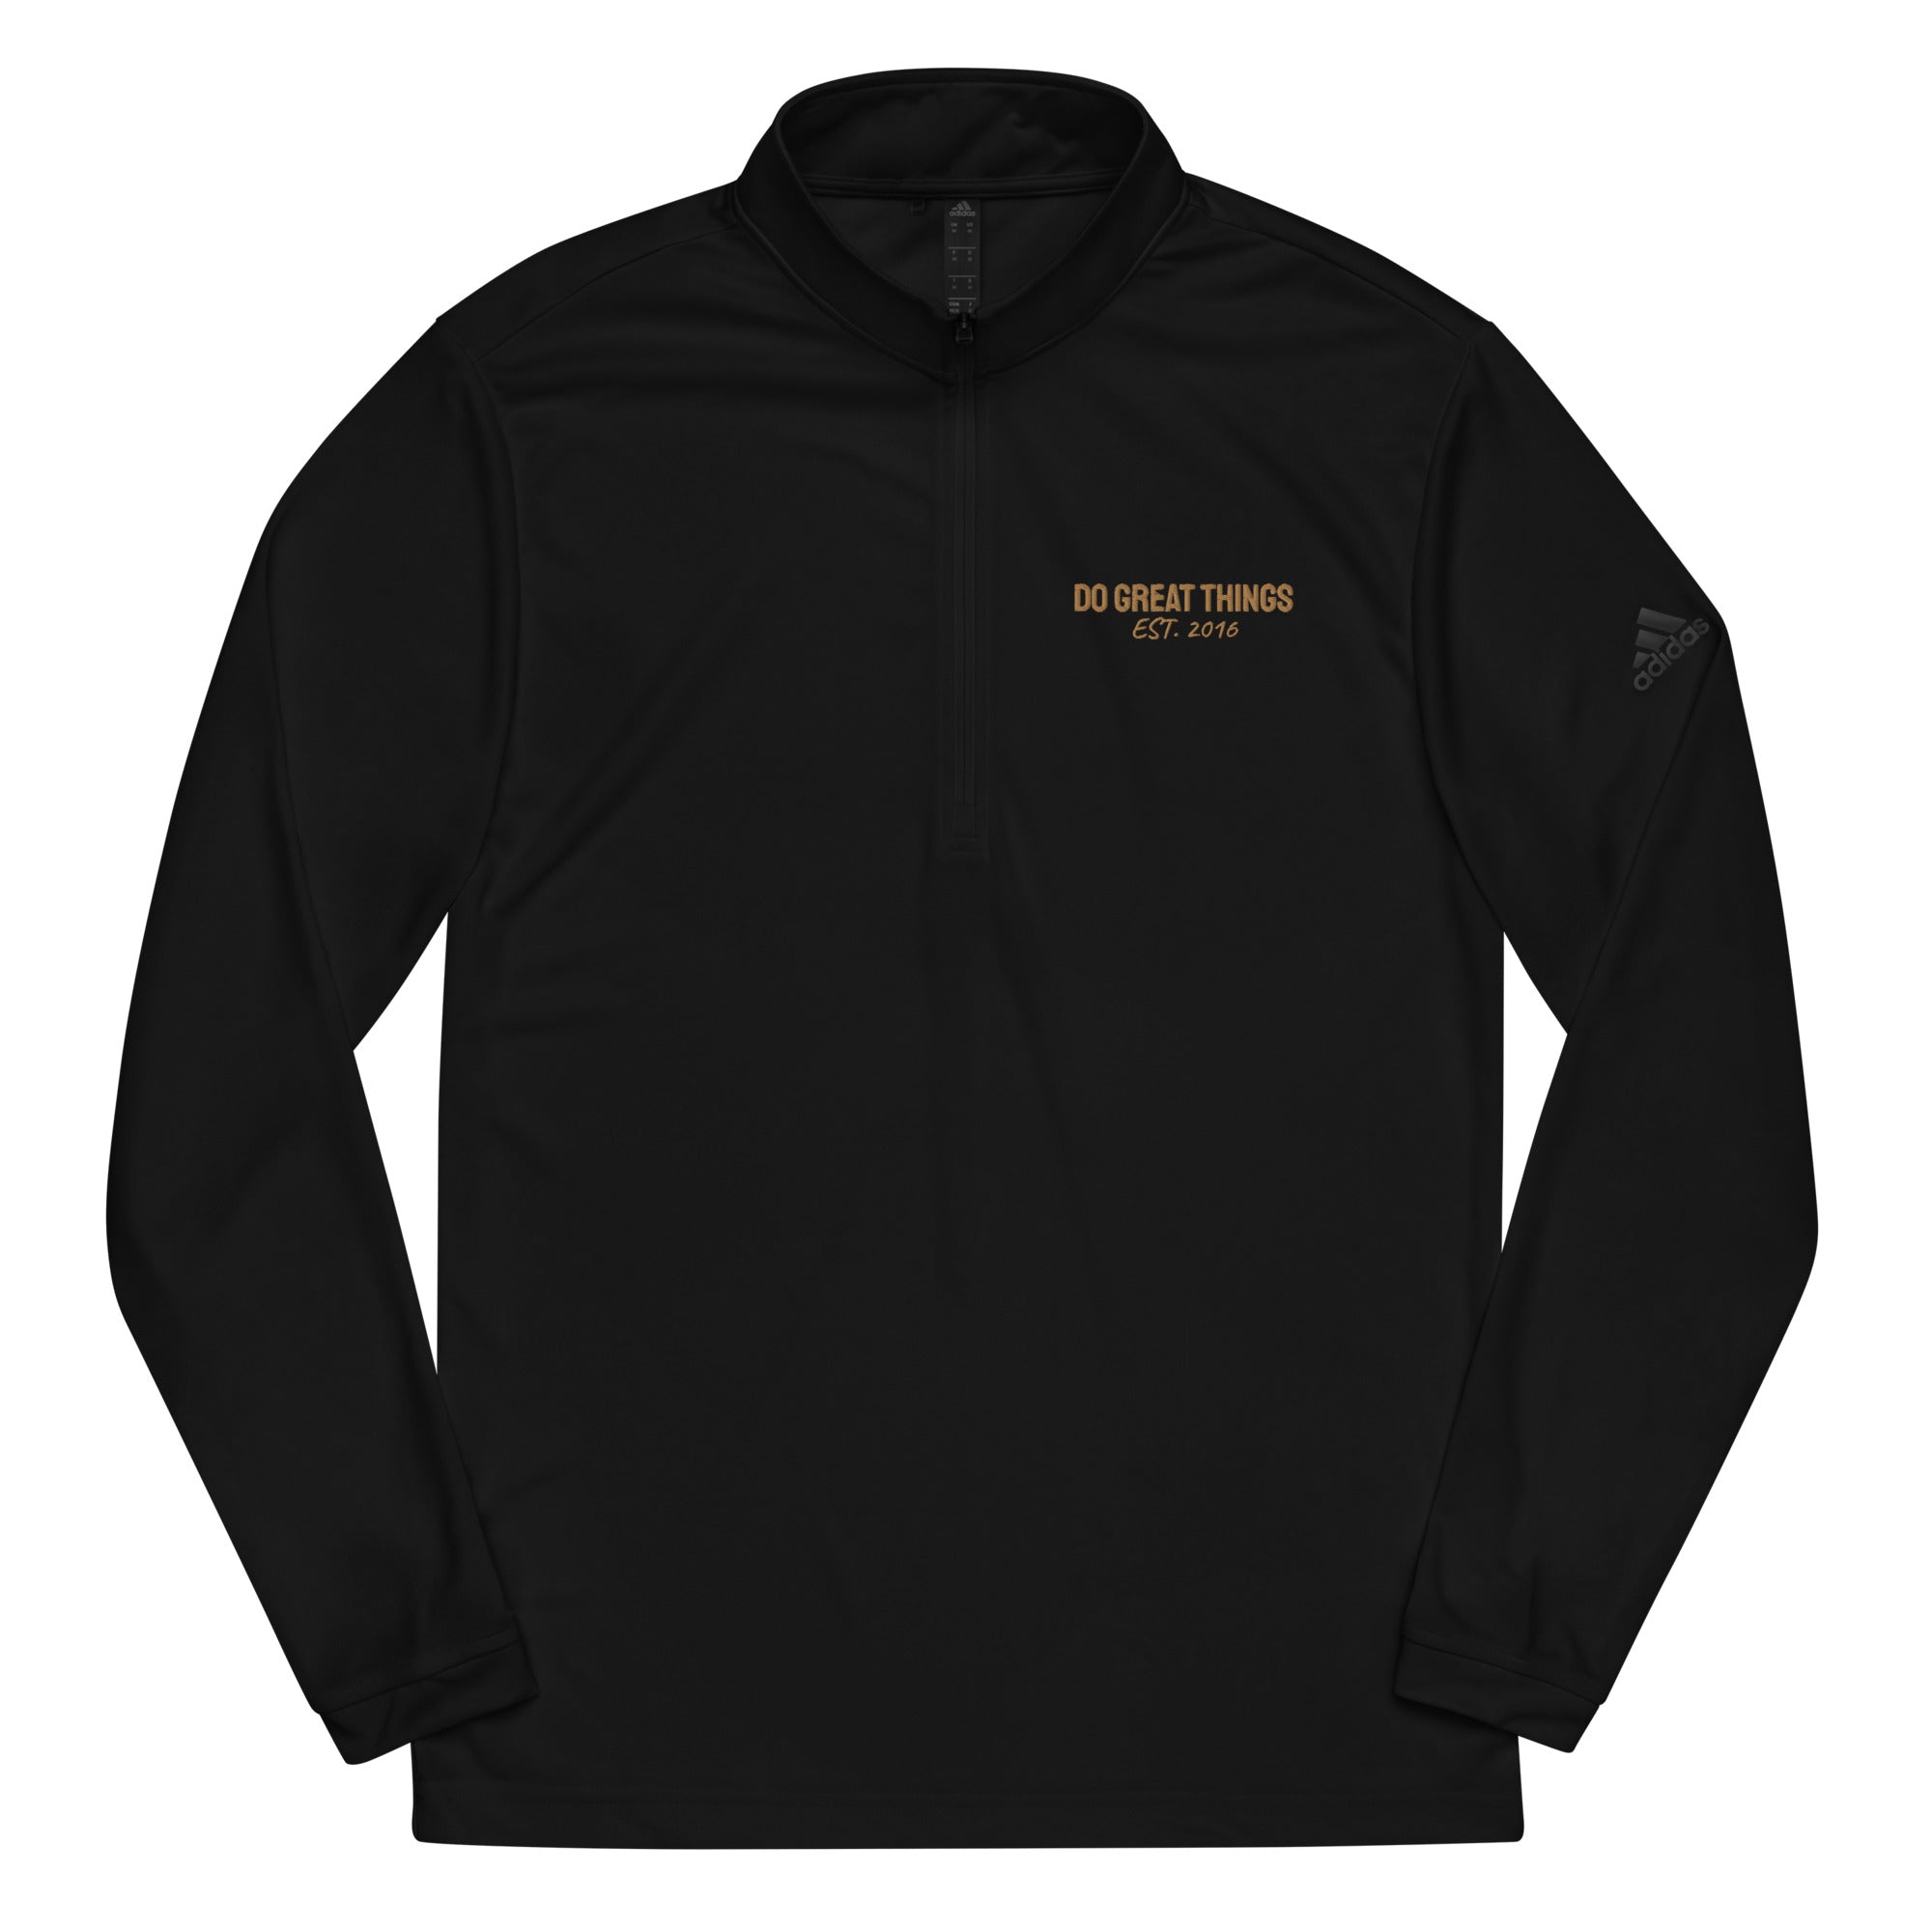 Do Great Things® Quarter zip pullover